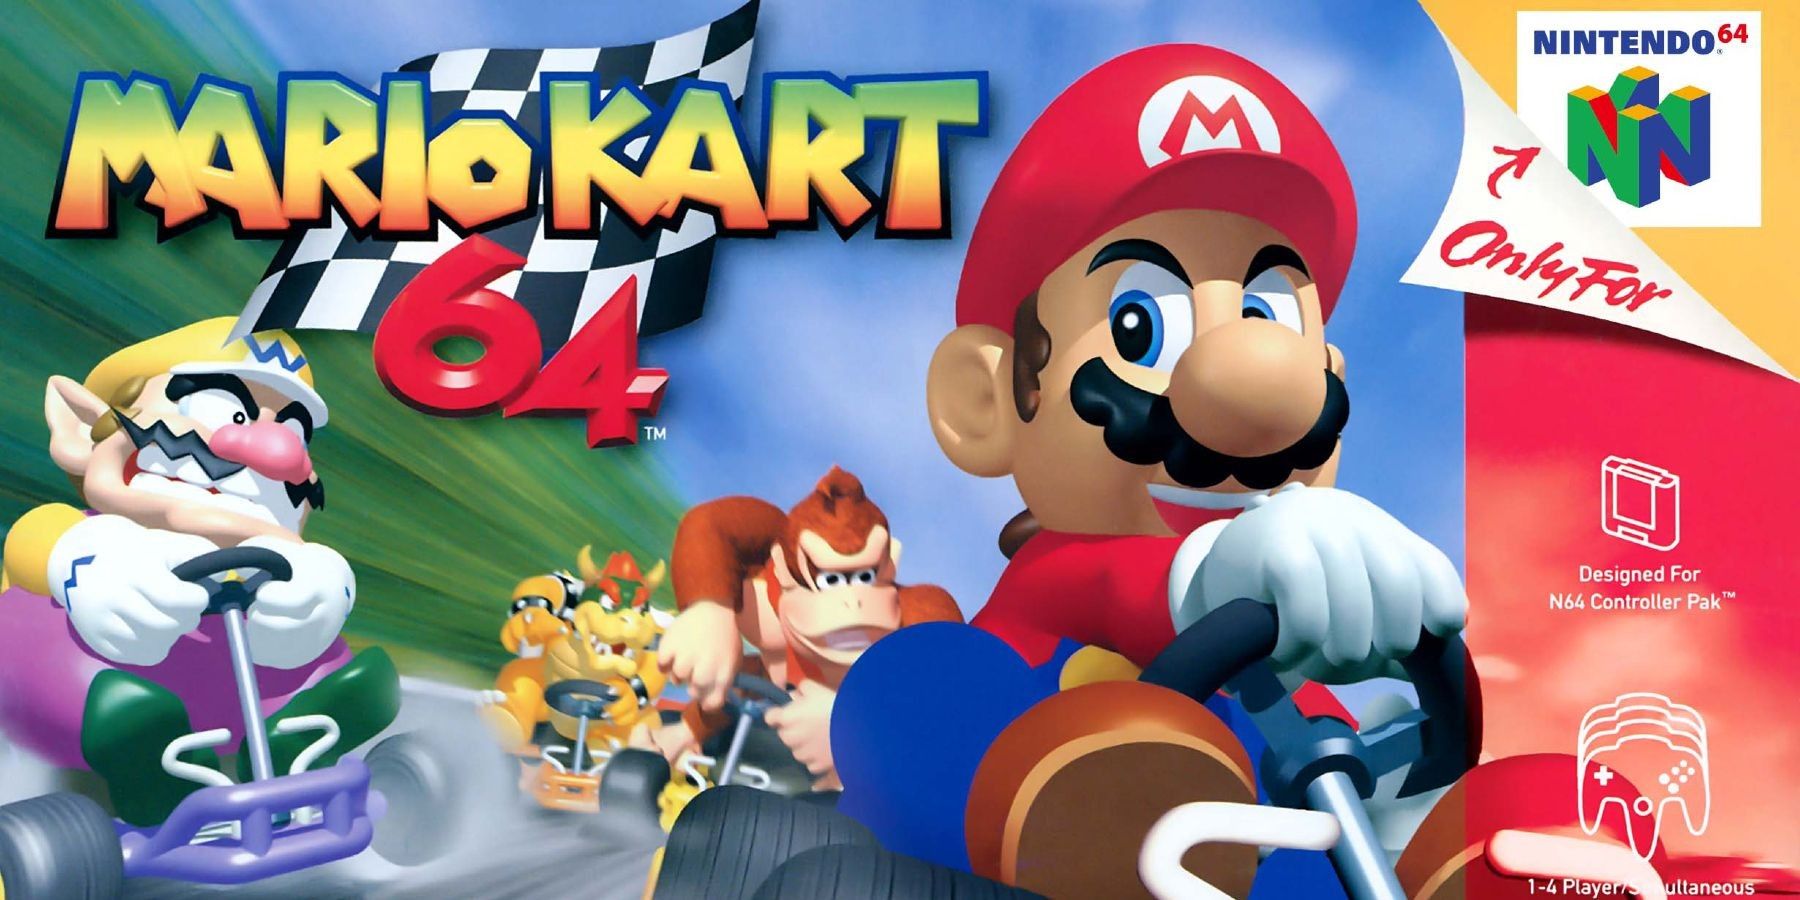 Mario Kart brings friends and families together for wholesome racing fun.